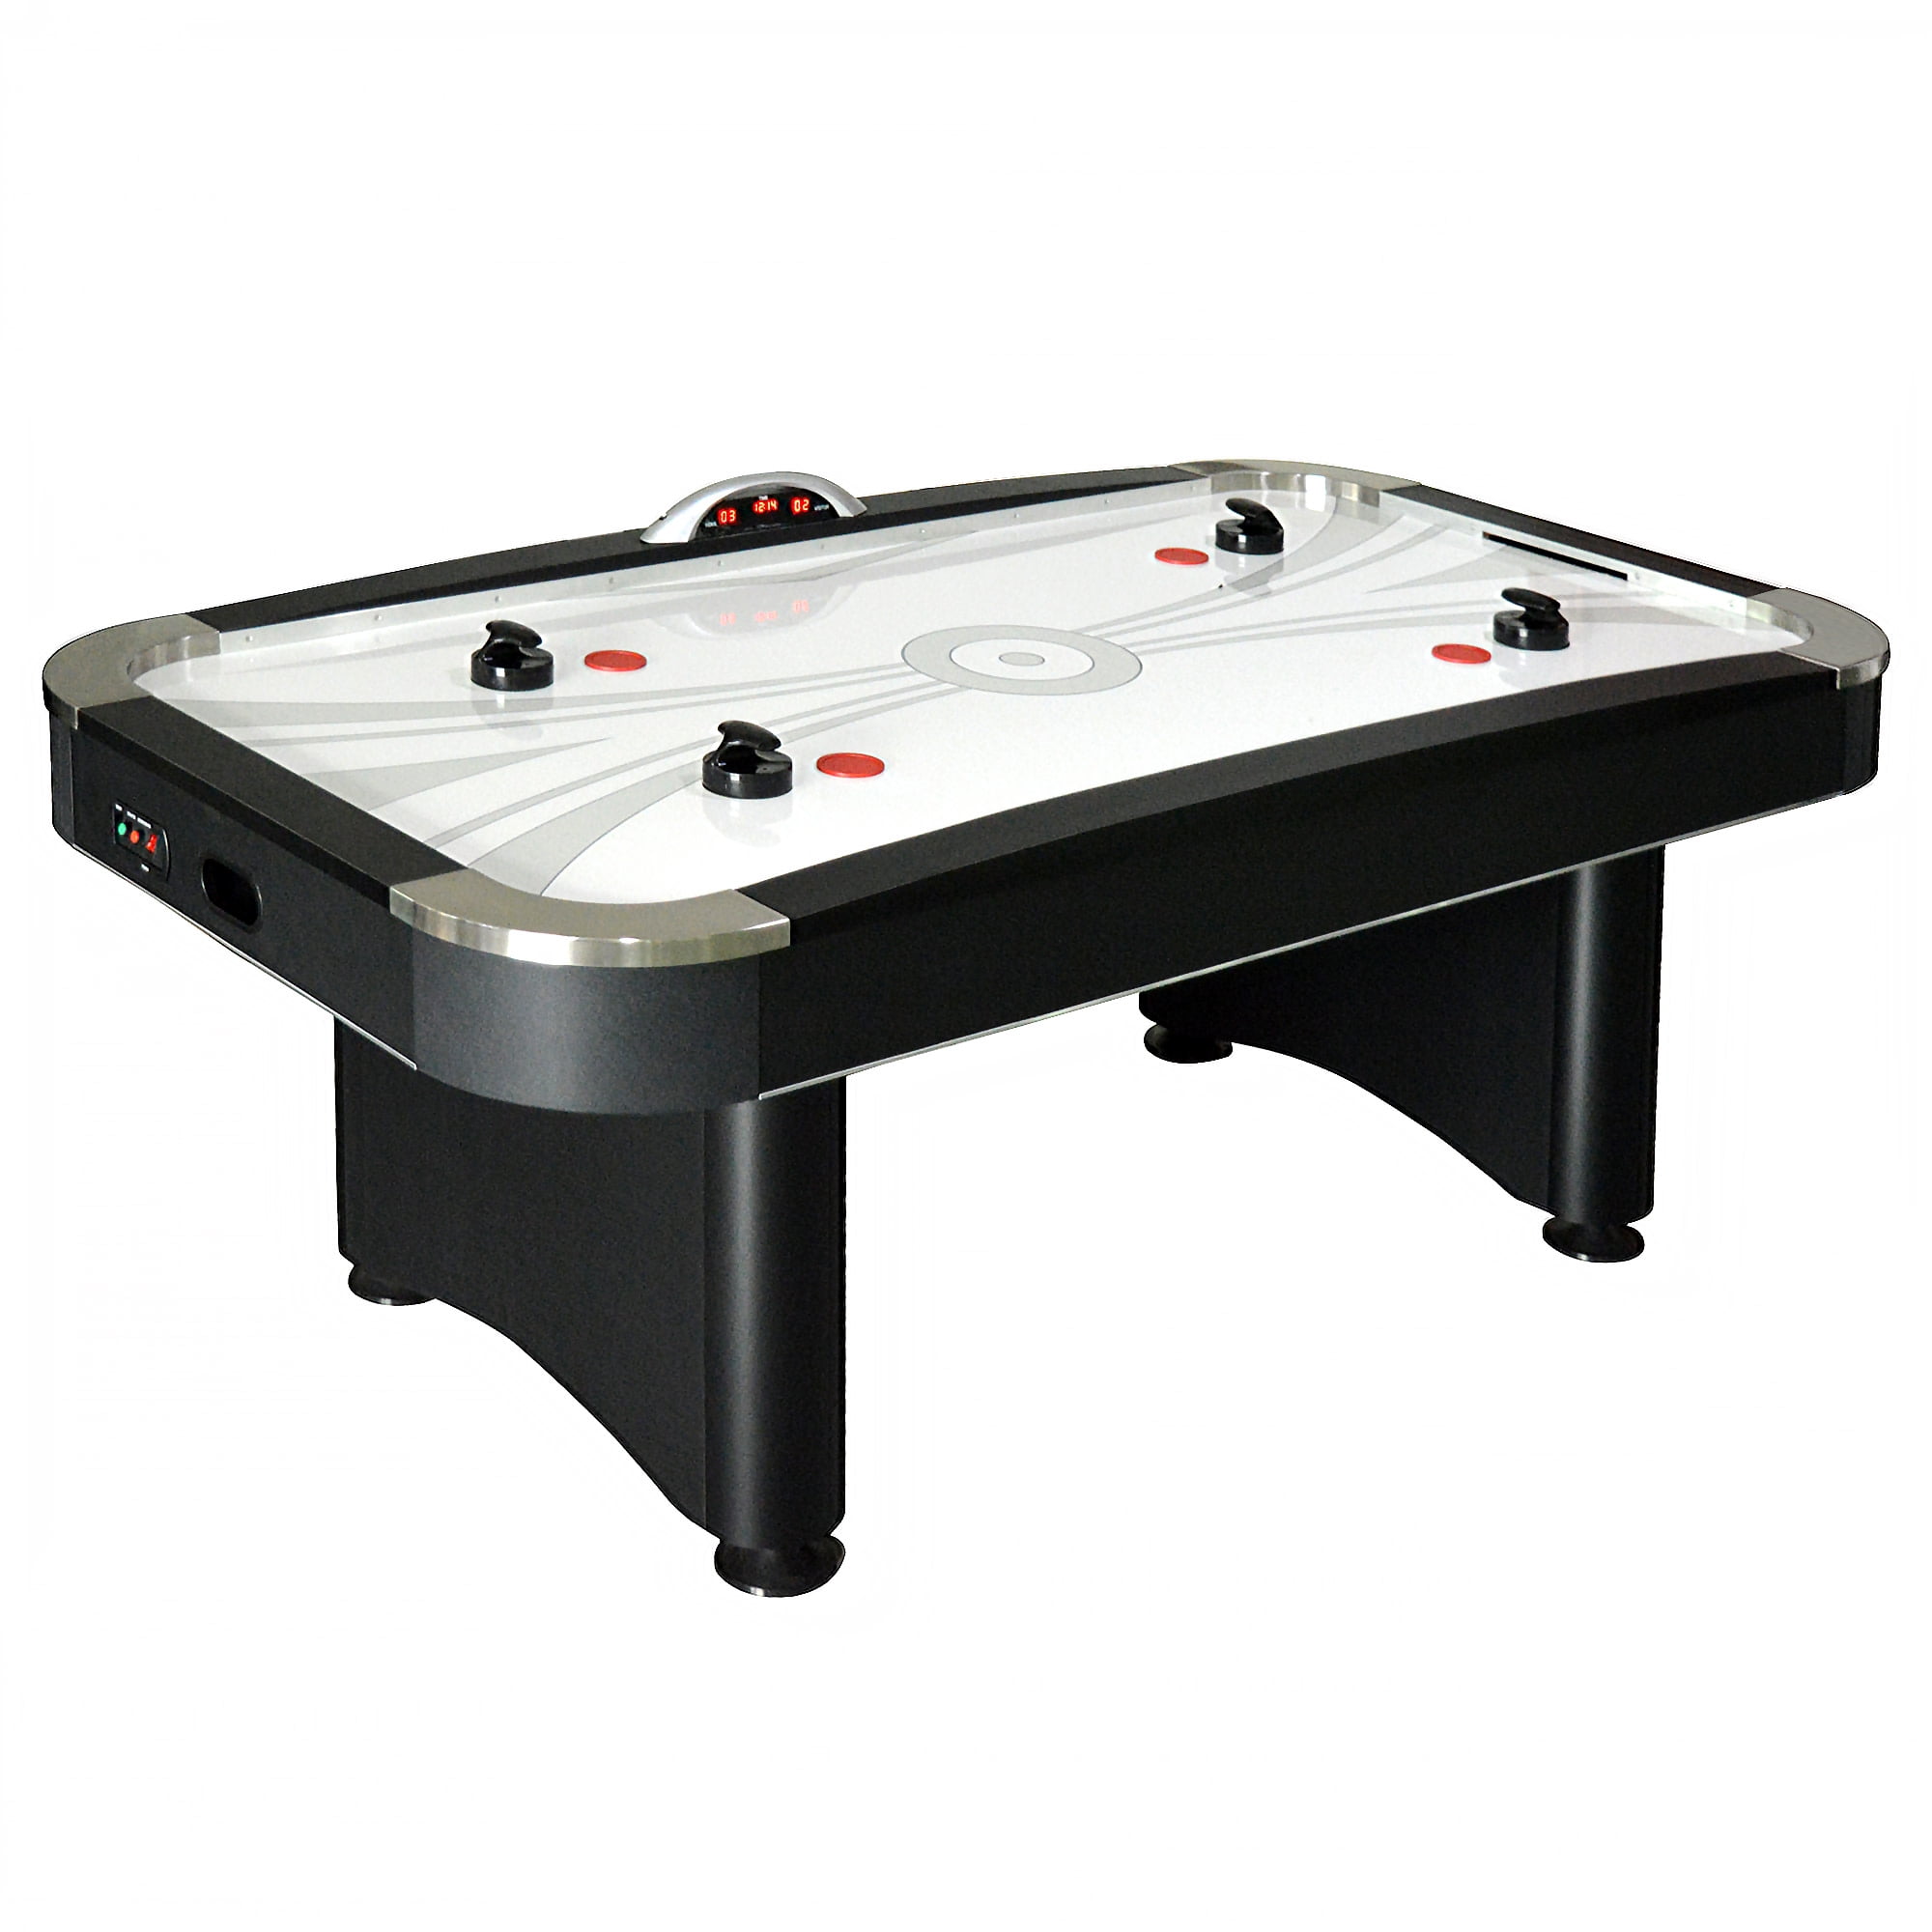 7-ft Air Hockey Table with LED Electronic ScoringHathaway Top Shelf